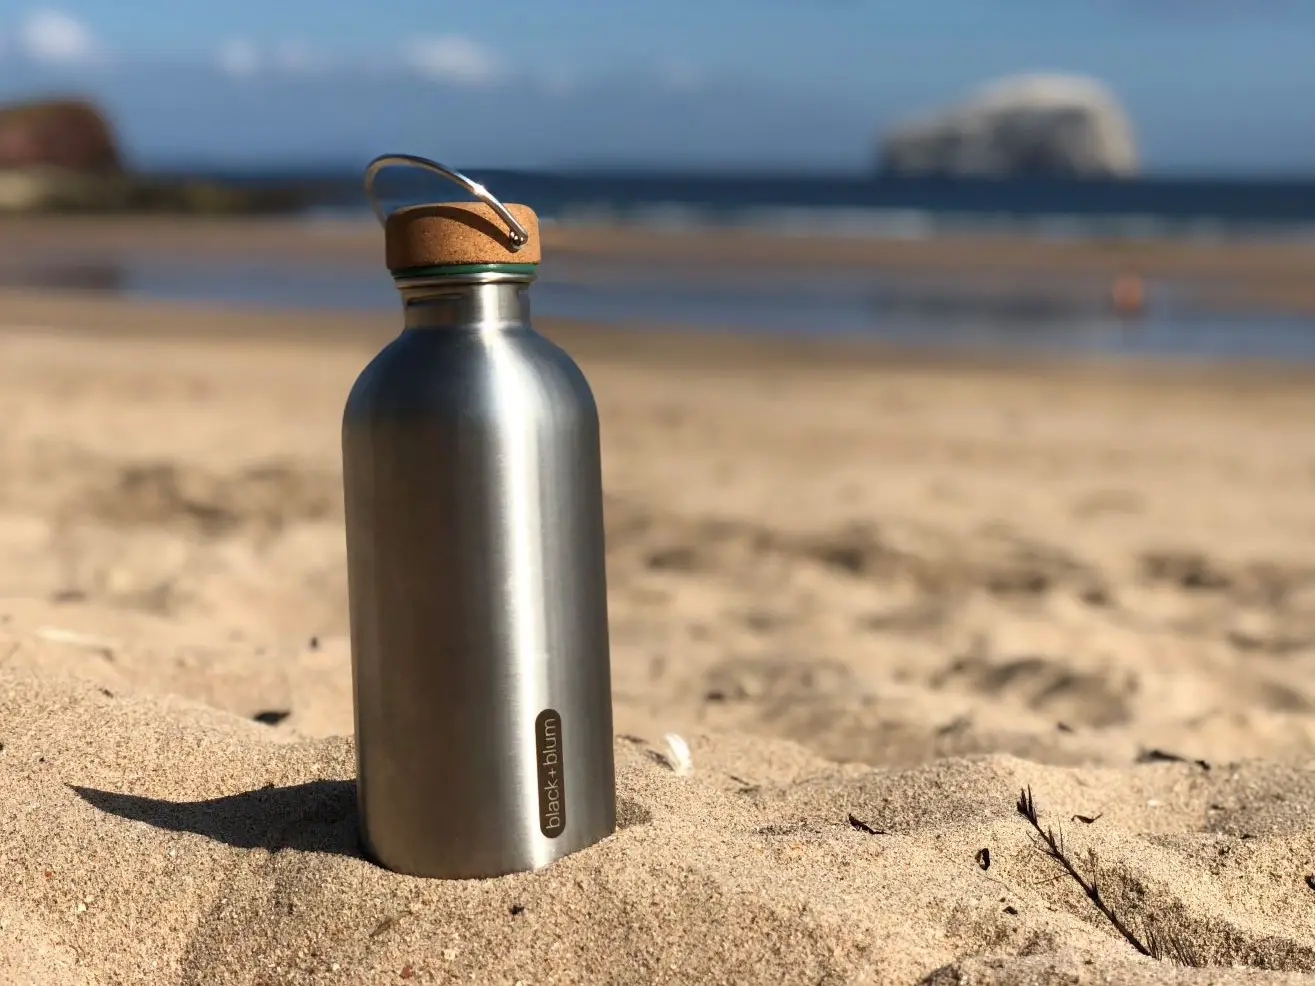 https://www.greenerlyfe.com/wp-content/uploads/2023/06/how-to-clean-stainless-steel-water-bottles.jpg